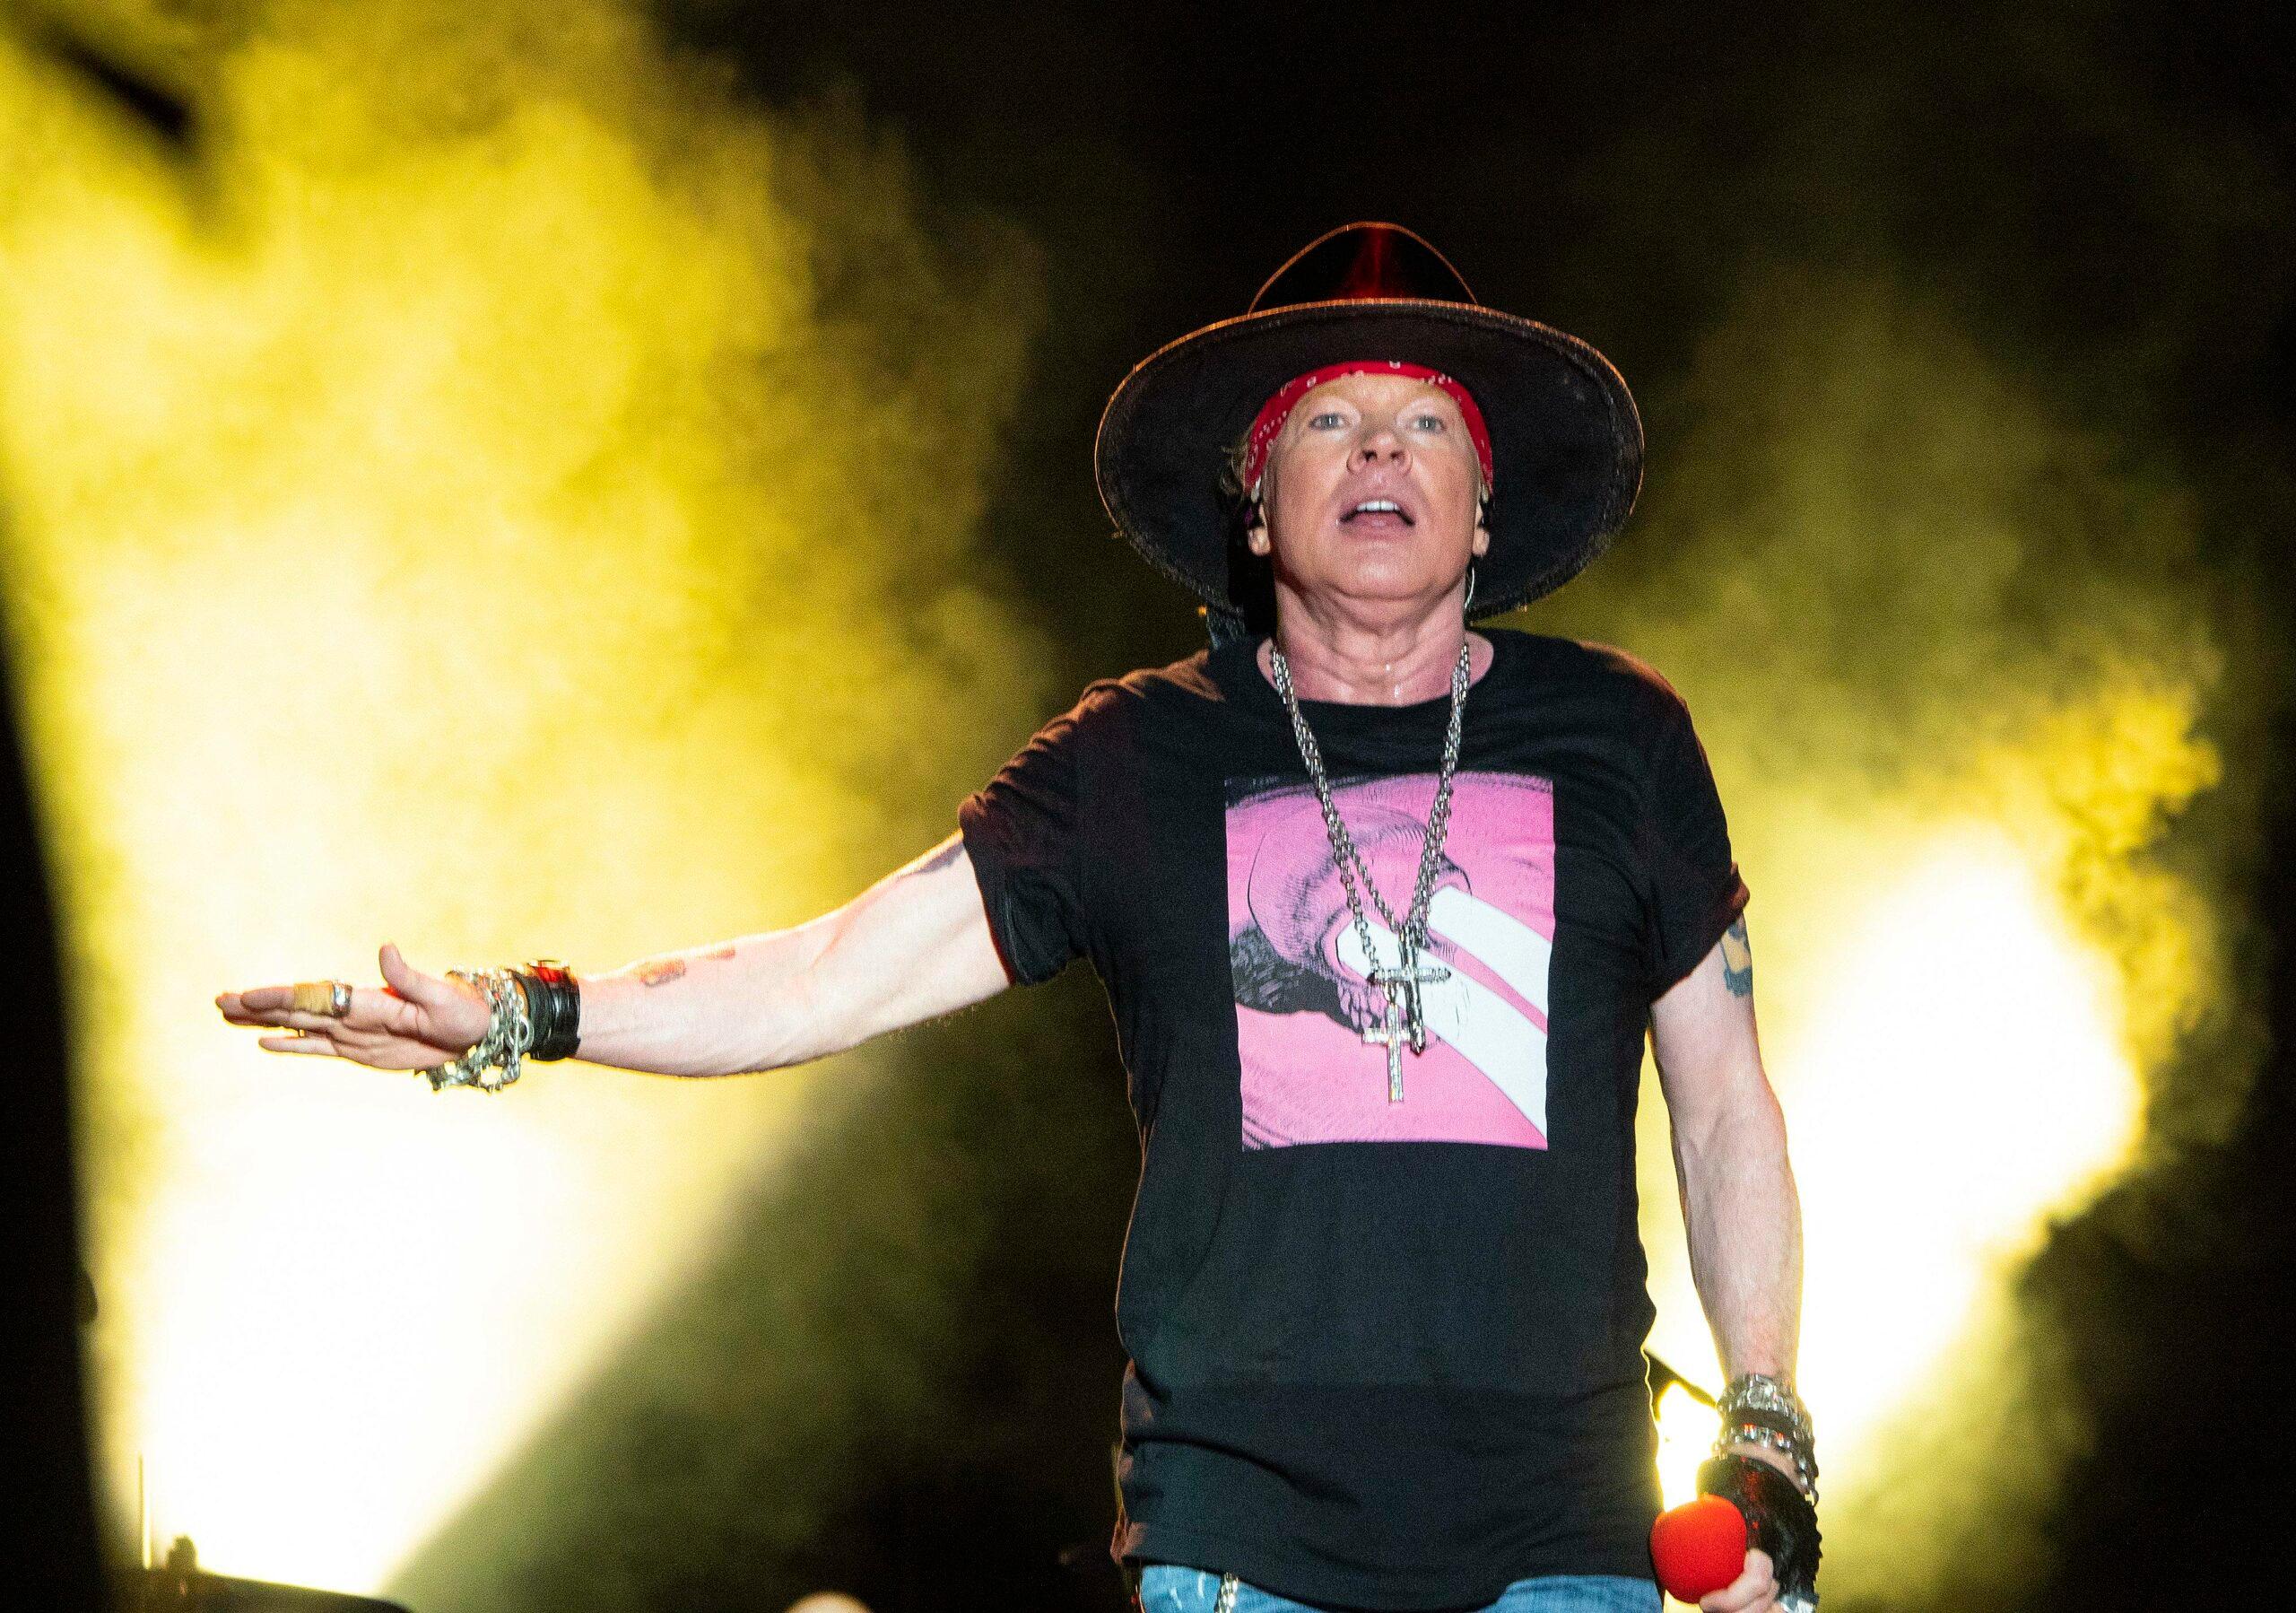 Singer Axl Rose of the rock band Guns N' Roses performs live on stage during a concert at Banc of California Stadium. 19 Aug 2021